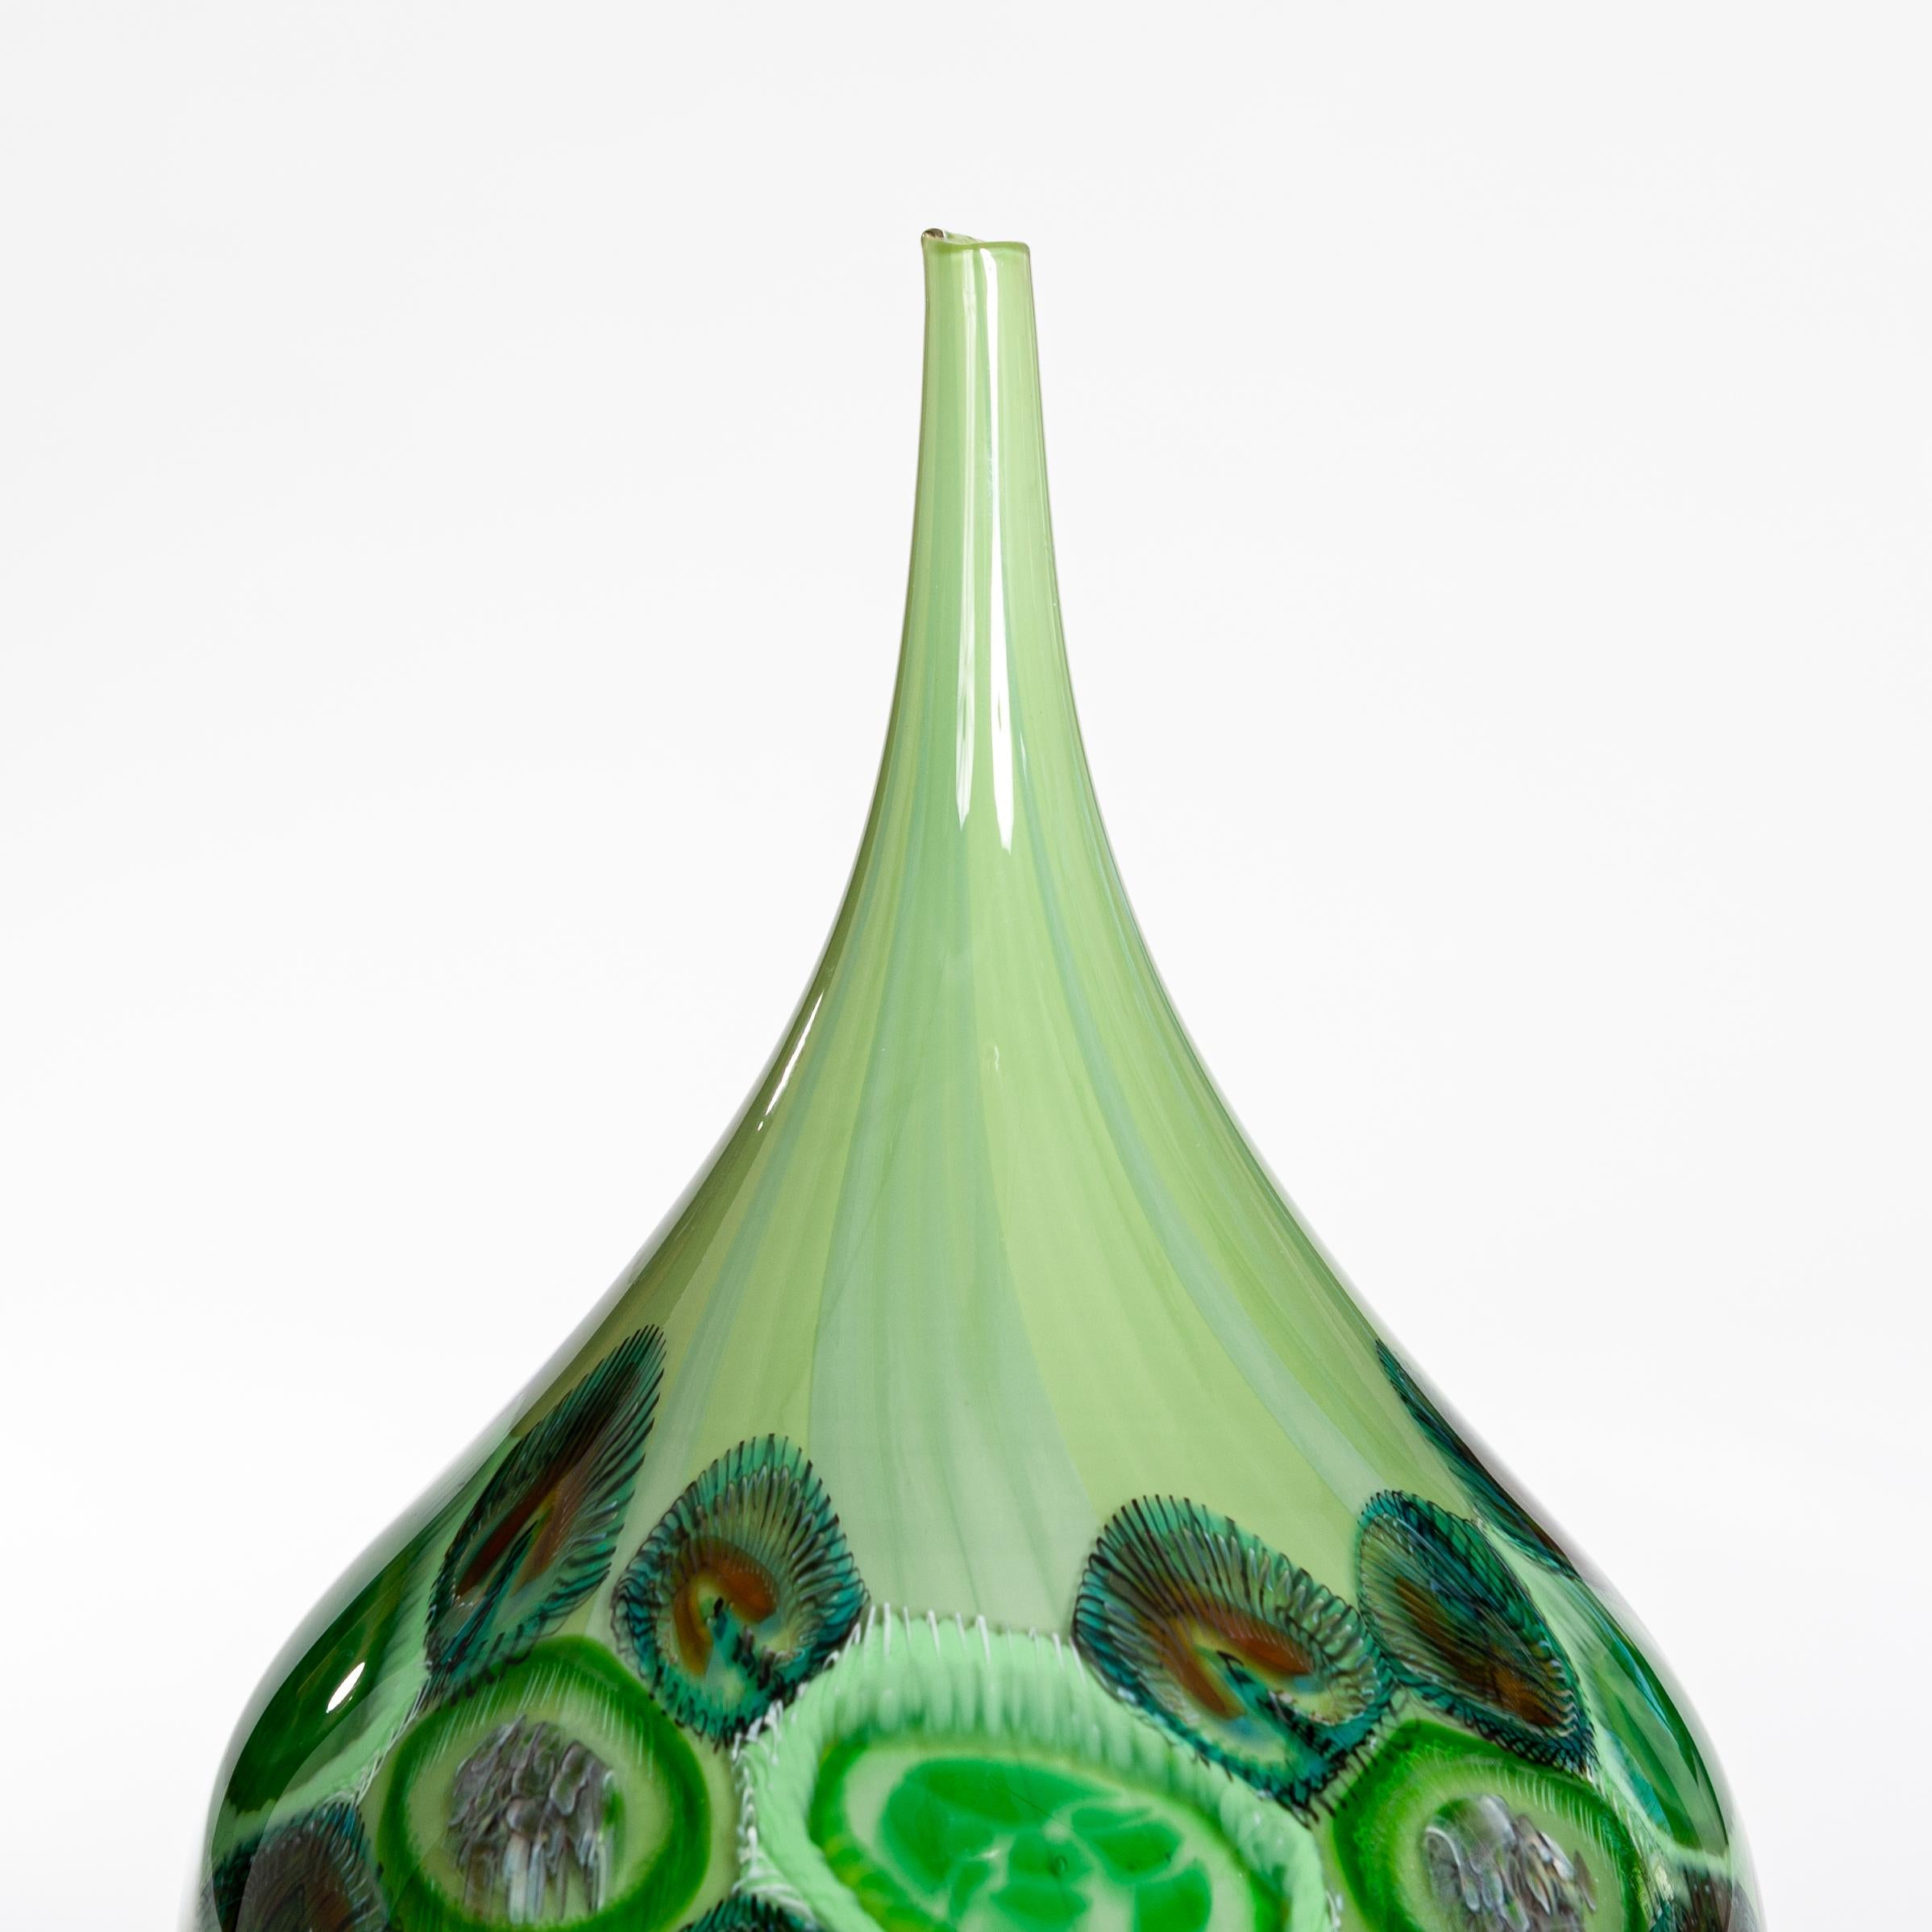 Contemporary Italian Modern Lime Green Murano Glass Vase with Murrines, Signed Afro Celotto